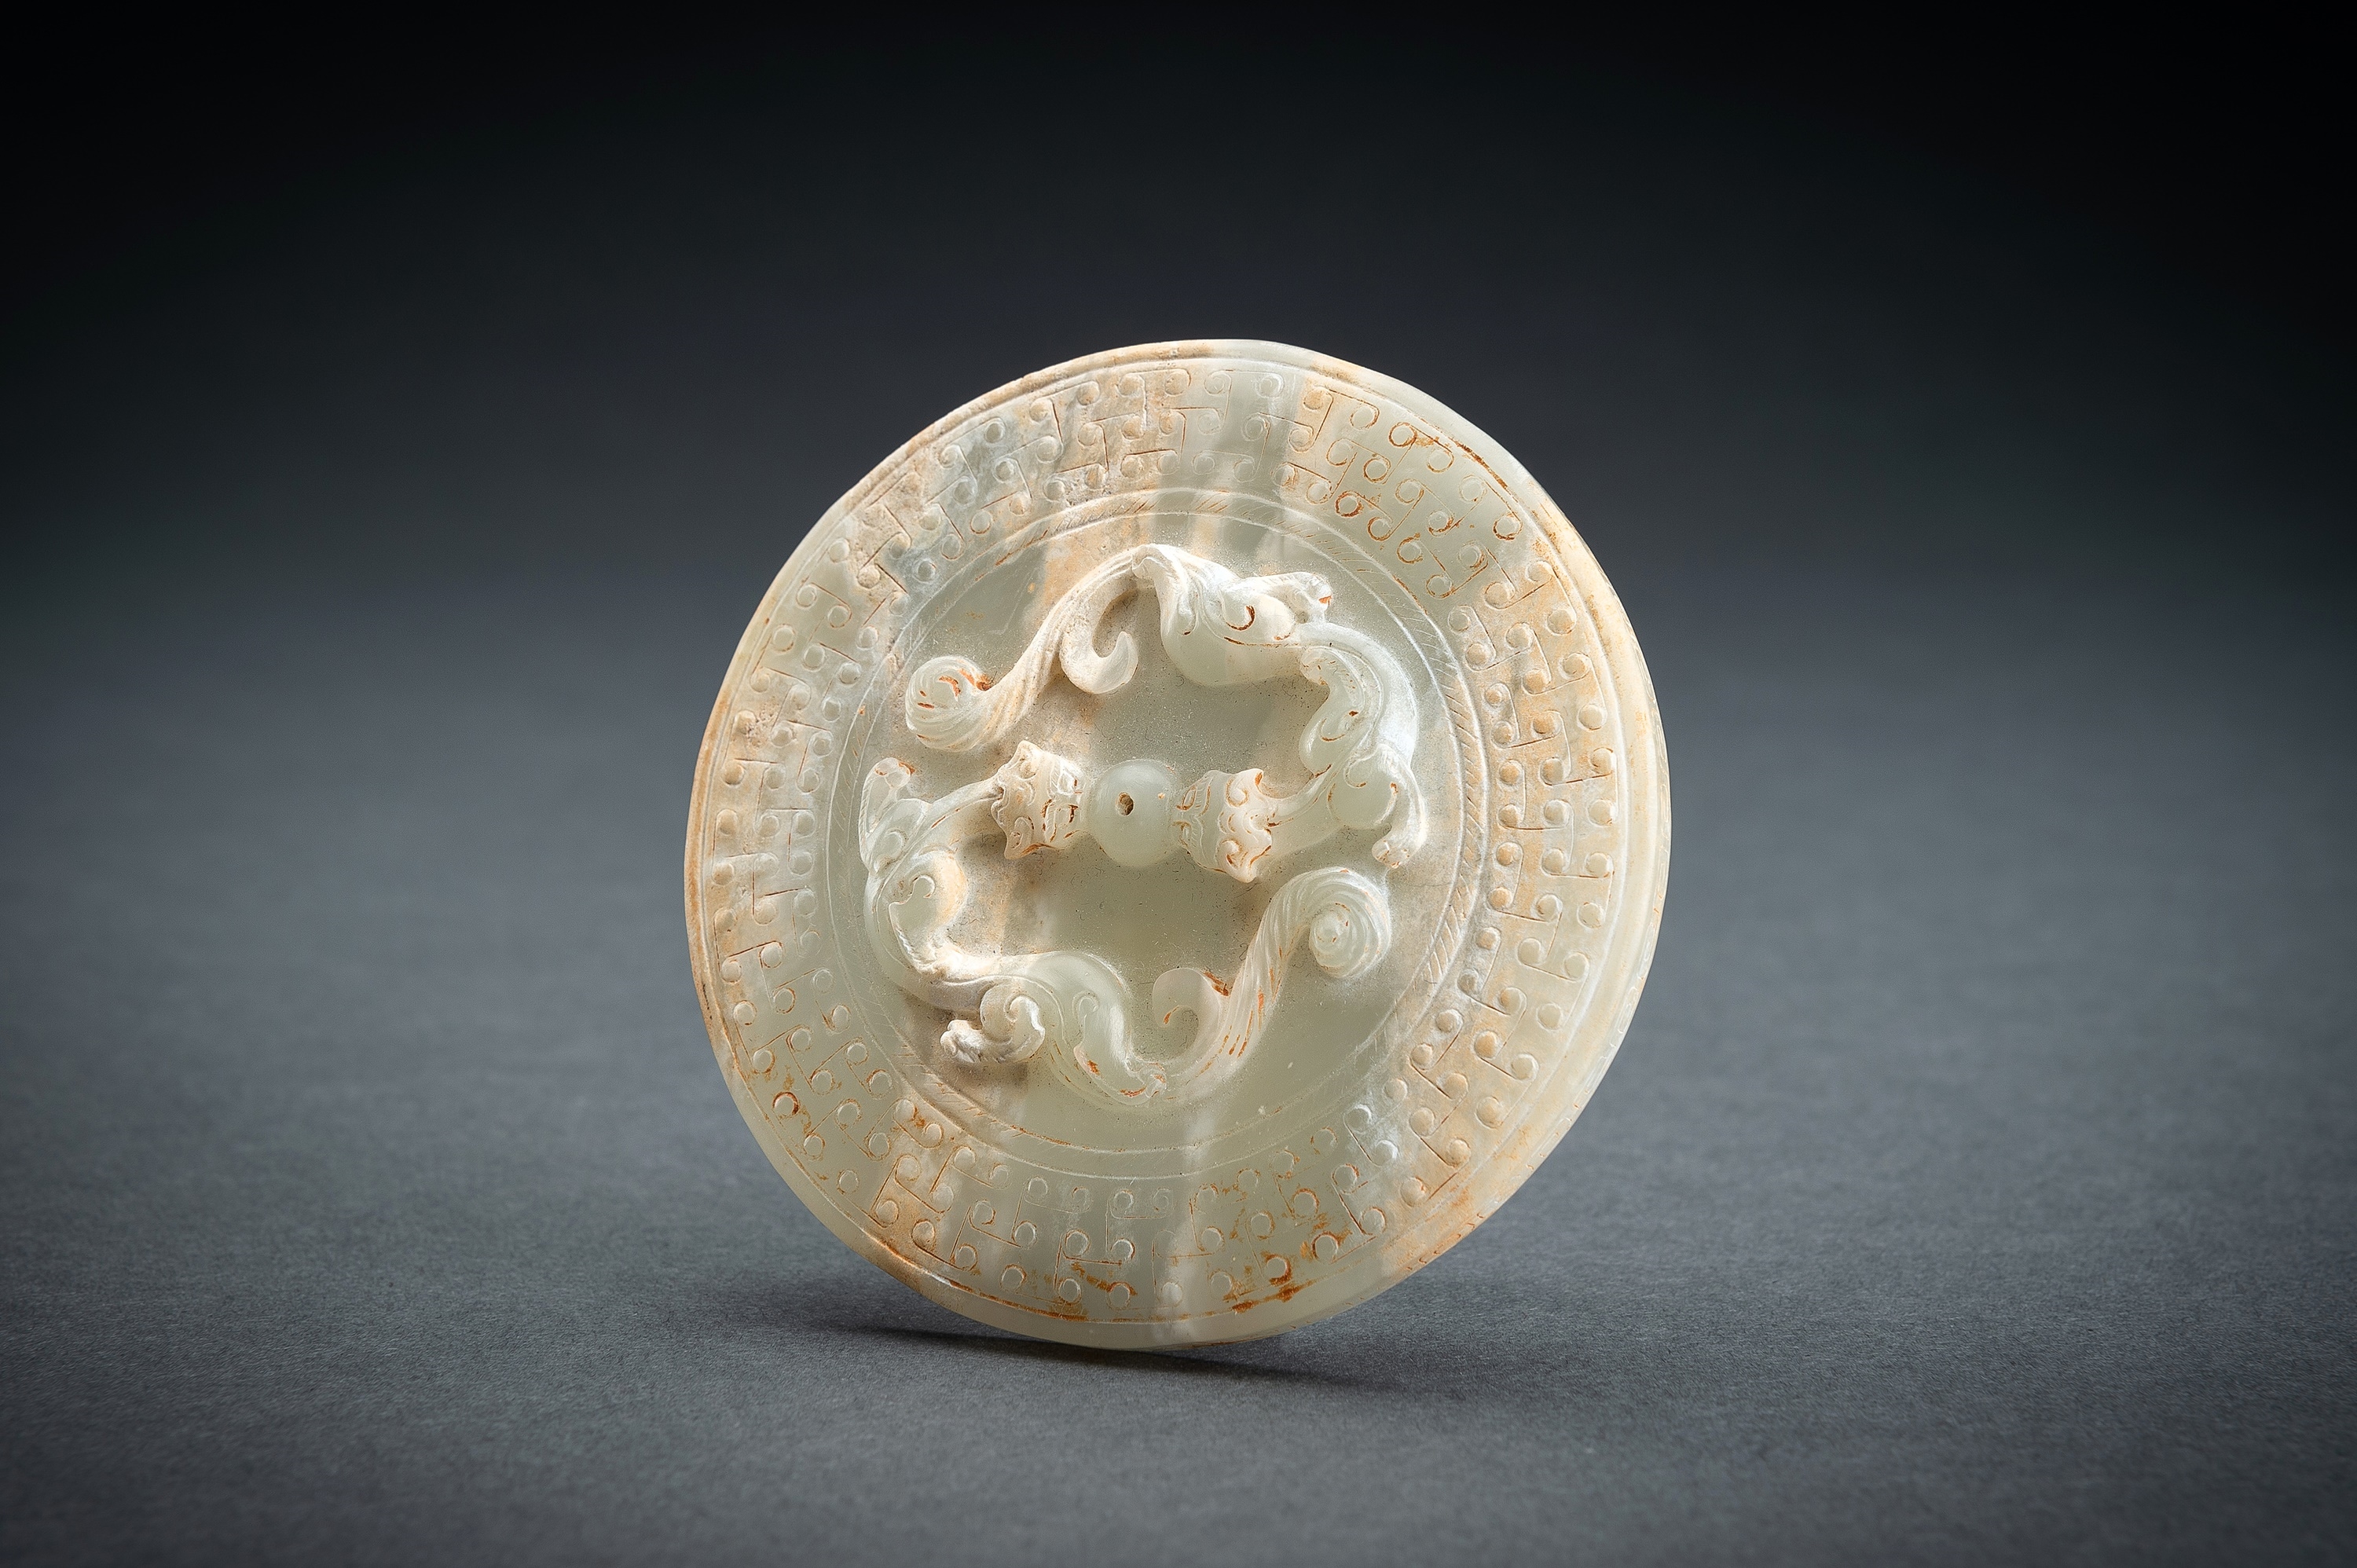 AN ARCHAISTIC PALE CELADON JADE ‘CHILONG’ BOX AND COVER by Han Dynasty, 20th century